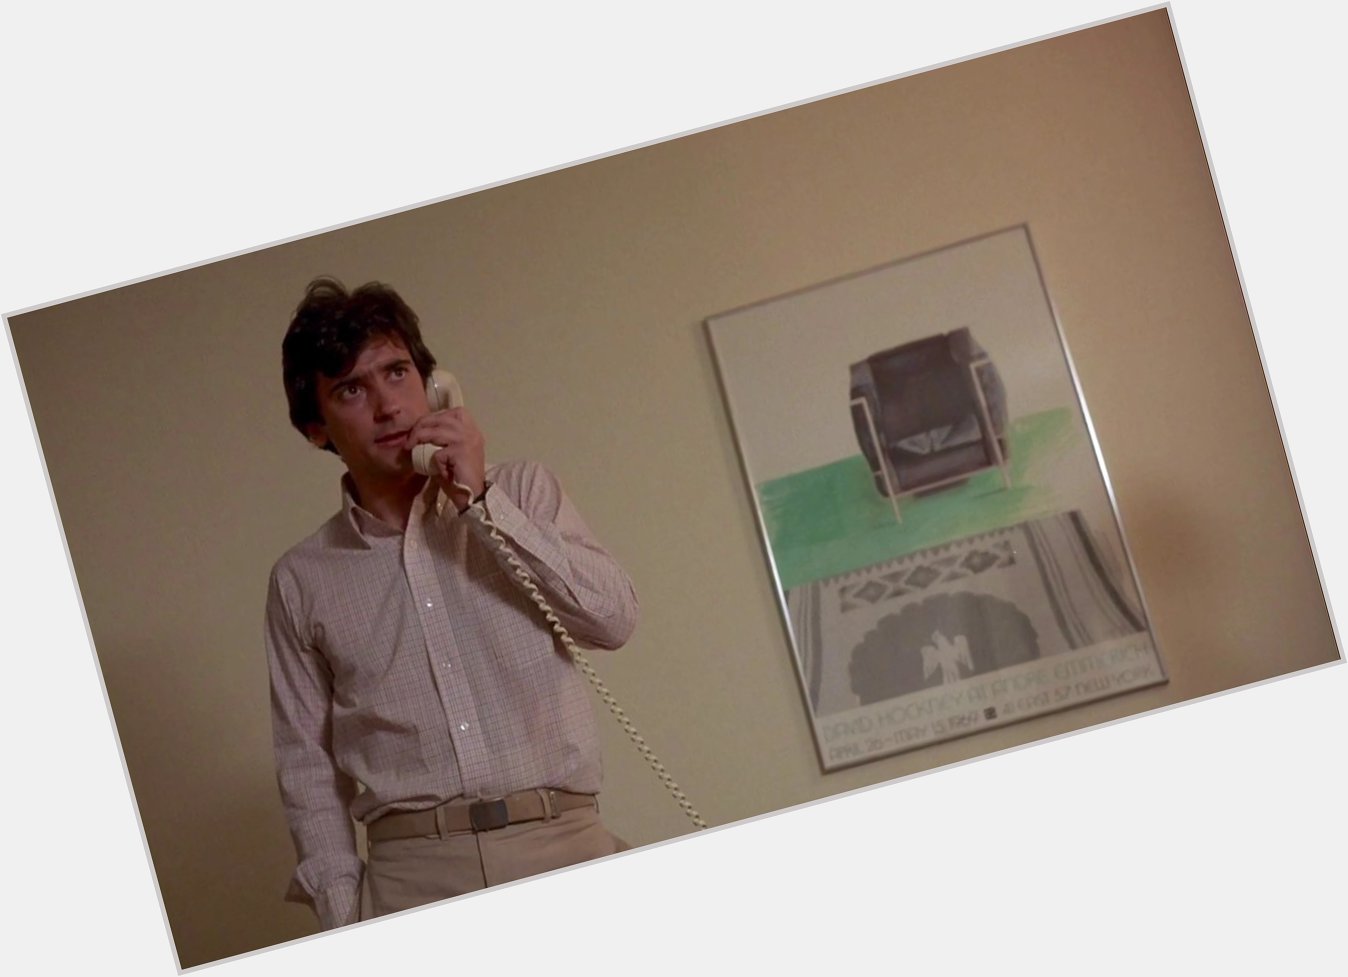 Wishing a very happy birthday to our favorite data entry worker, Griffin Dunne 